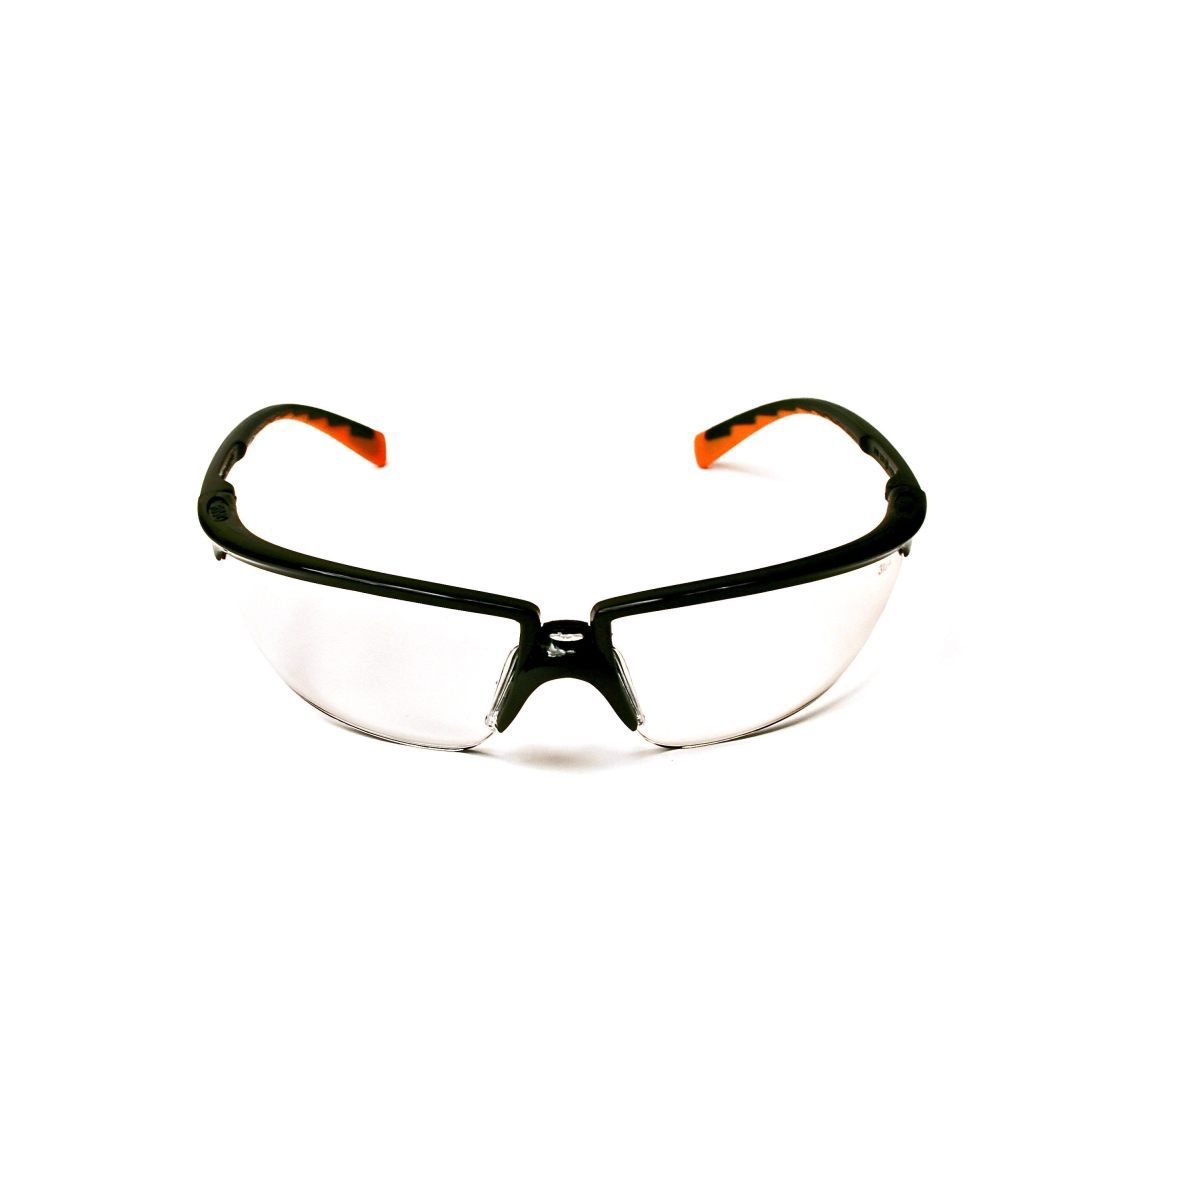 3M™ Privo™ Protective Eyewear 12261-00000-20 Clear Anti-Fog Lens, Black Frame (Availability restrictions apply.)